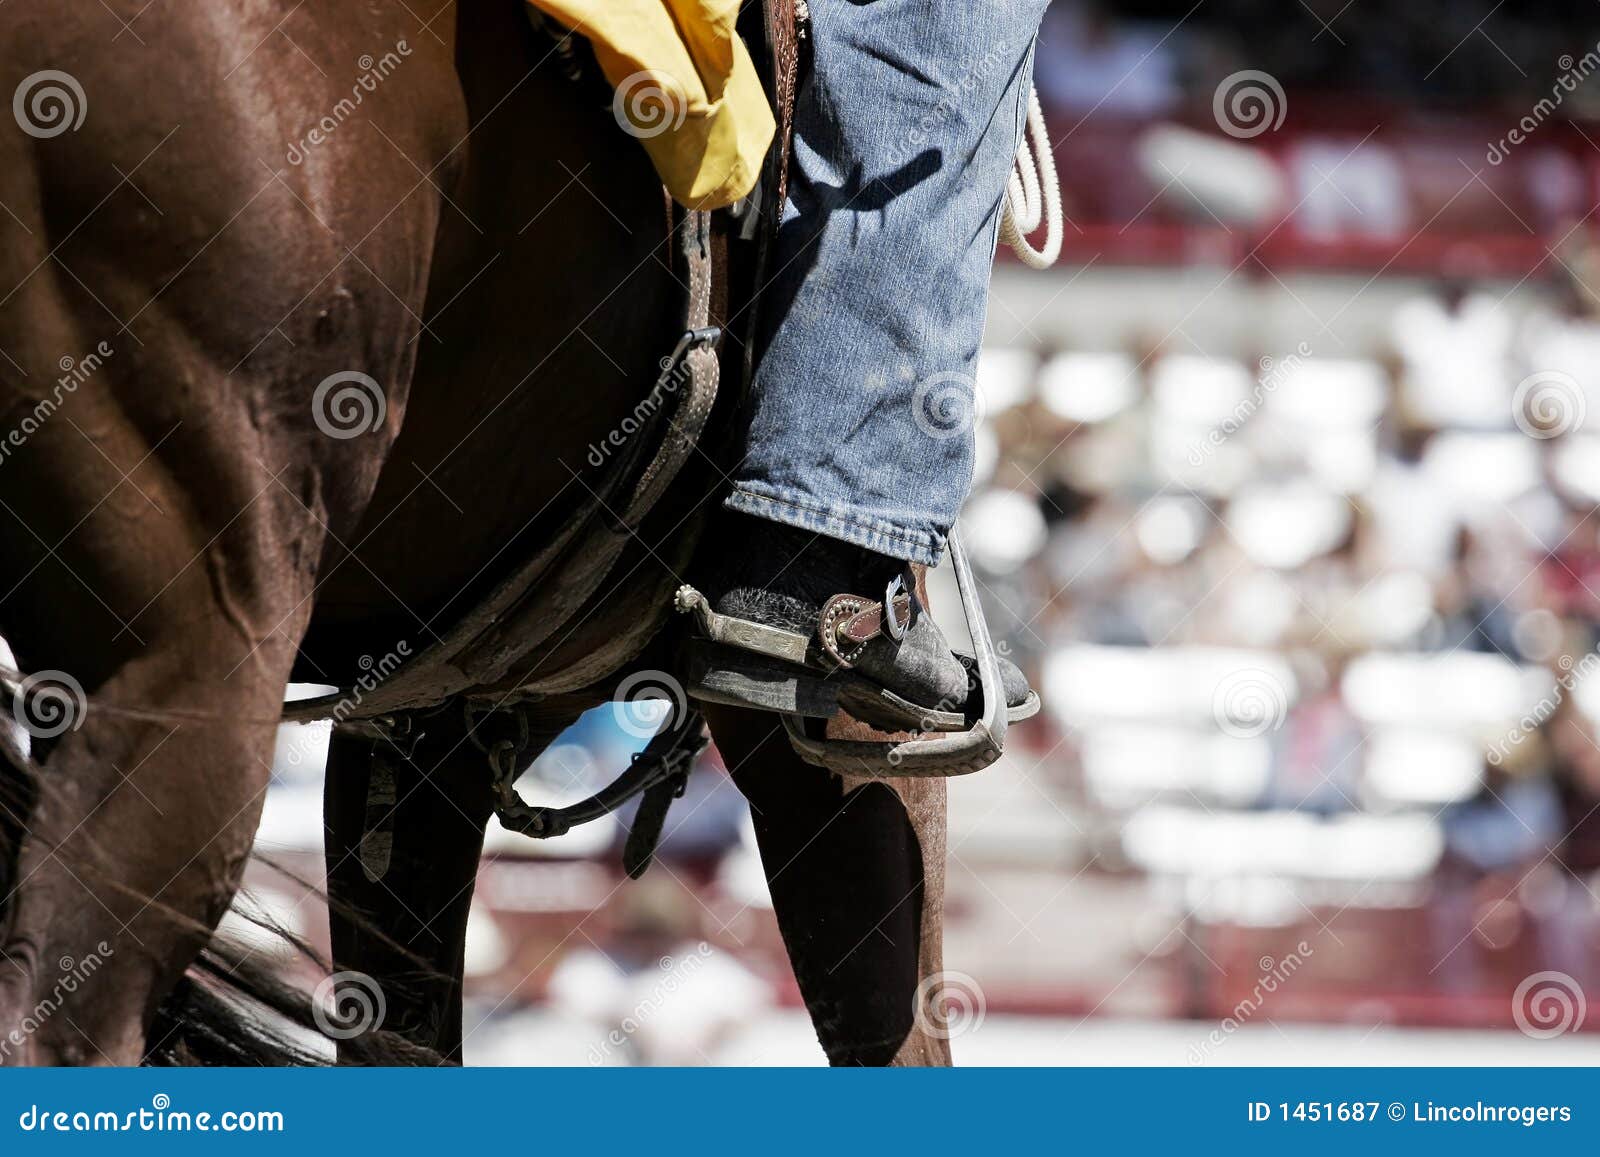 rodeo boot, spur, & horse